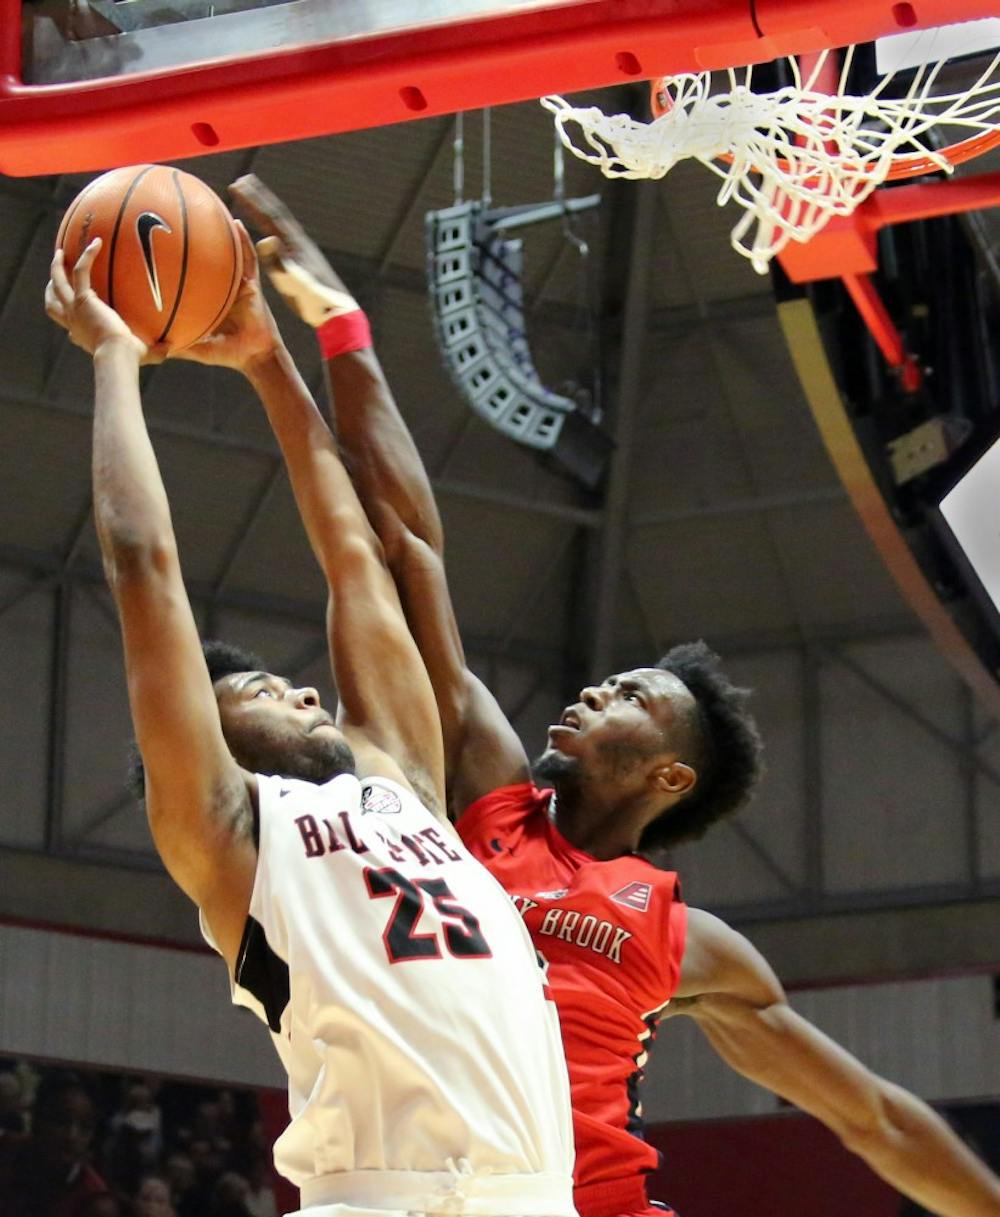 Sophomore forward Tahjai Teague gets fouled by Stony Brook’s Elijah Olaniyi during the Cardinals’ game against the Seawolves on Nov. 17 in John E. Worthen Arena. Teague was Ball State’s third leading scorer with 13 points. Paige Grider, DN